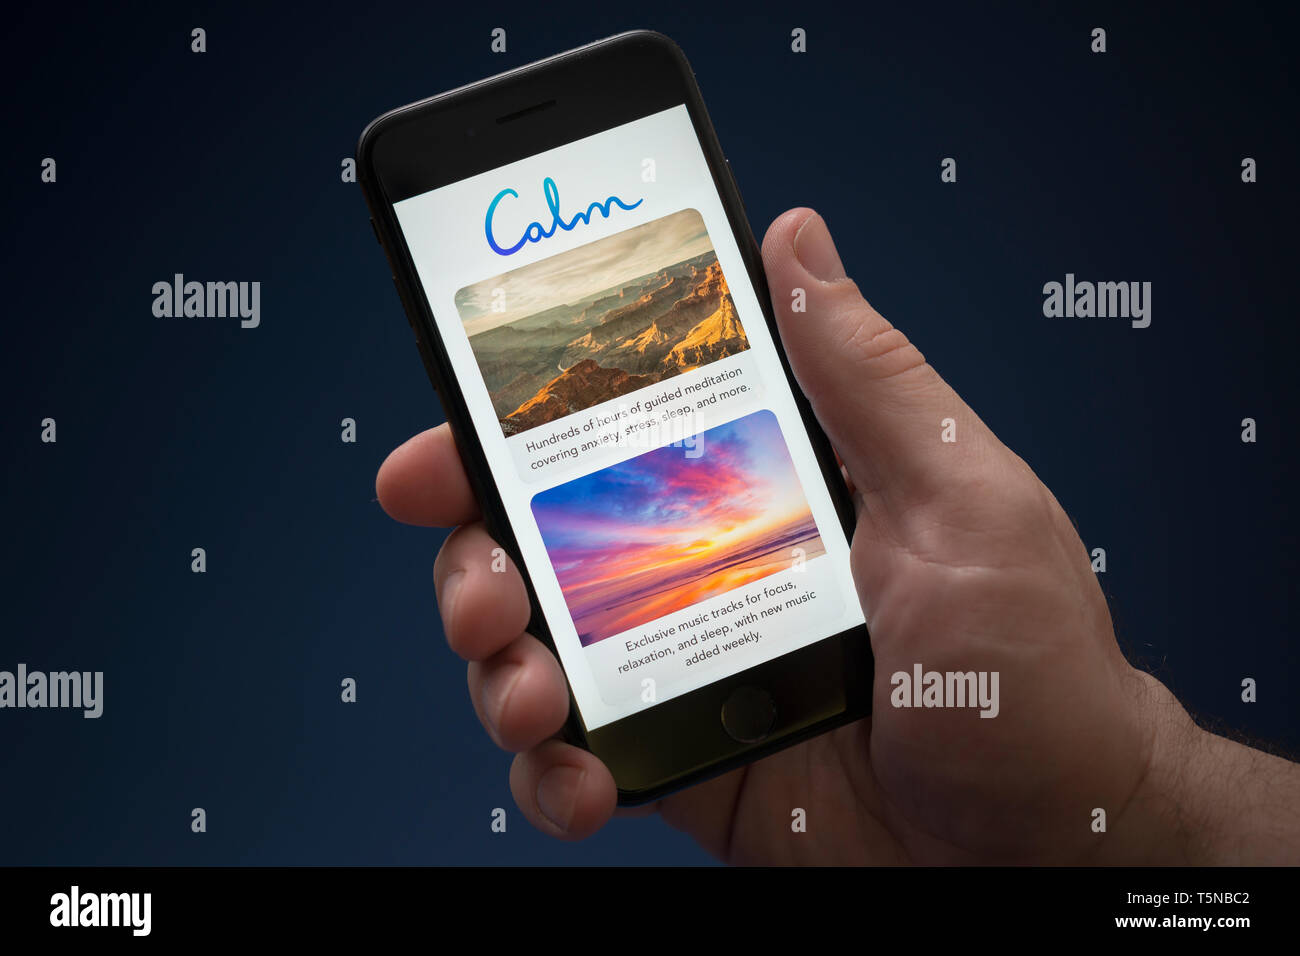 A man looks at his iPhone which displays the Calm logo (Editorial use only). Stock Photo